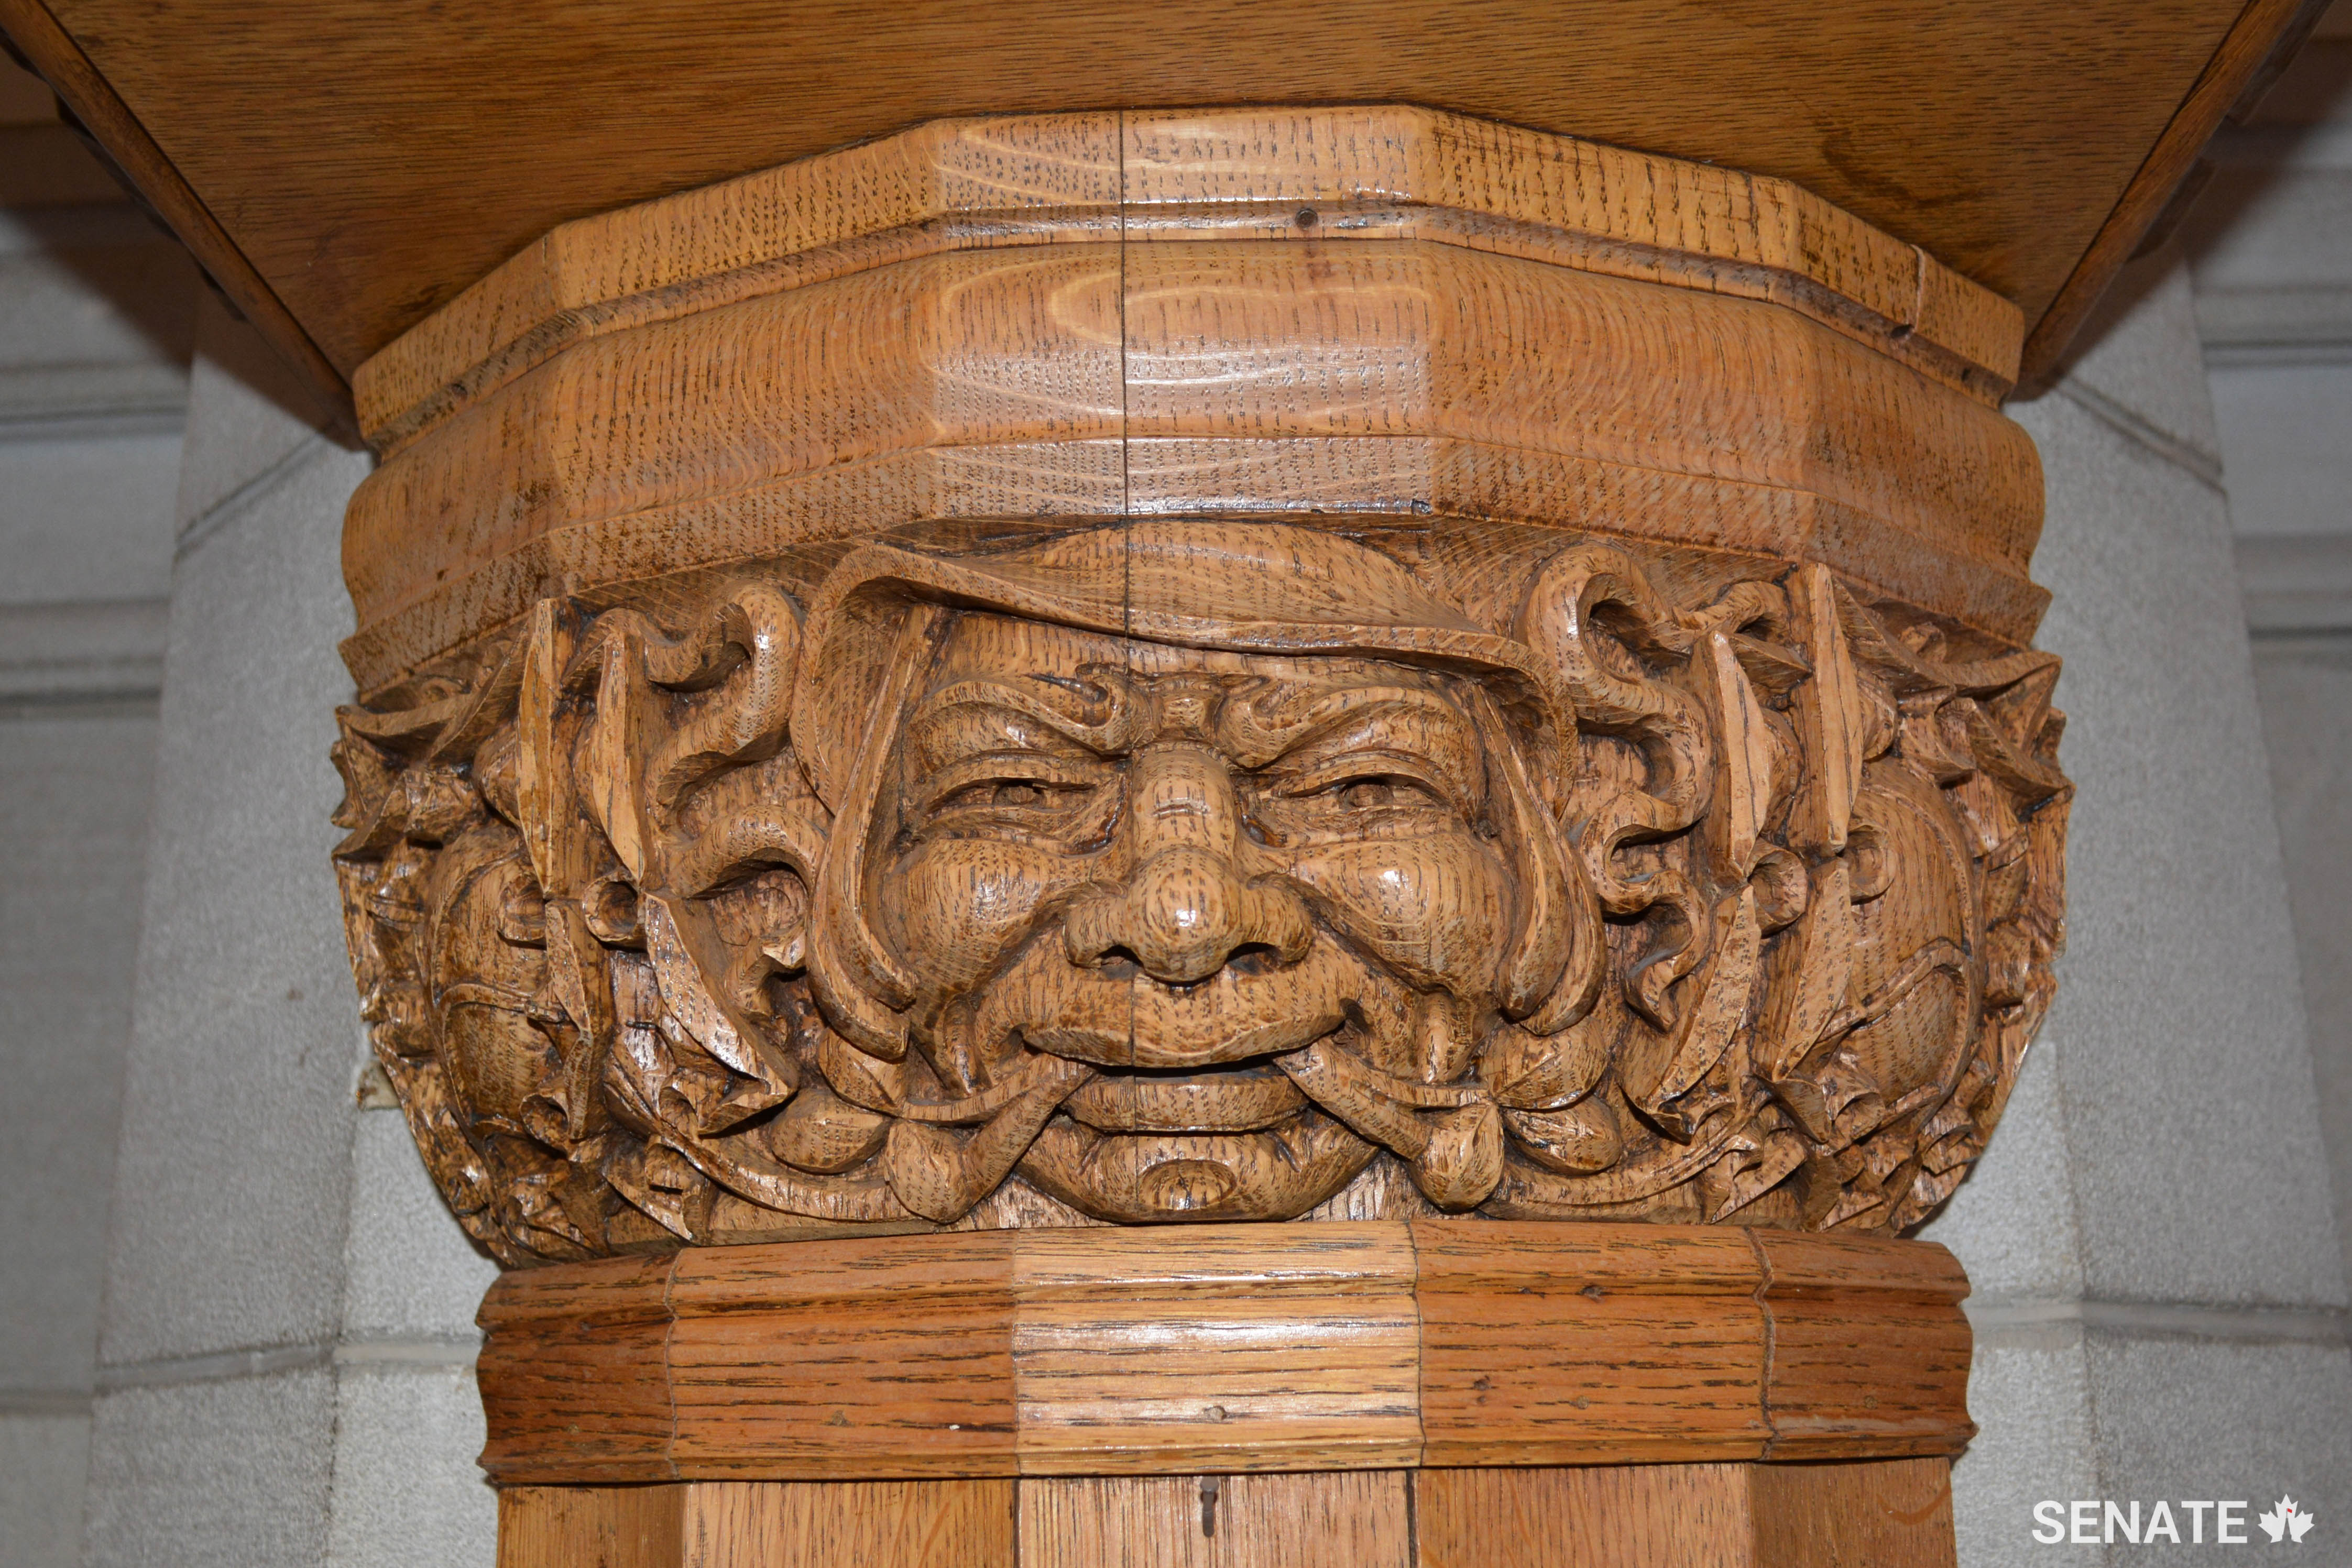 One of several Green Man characters carved into oak pillars in the Senate Speaker’s chambers.